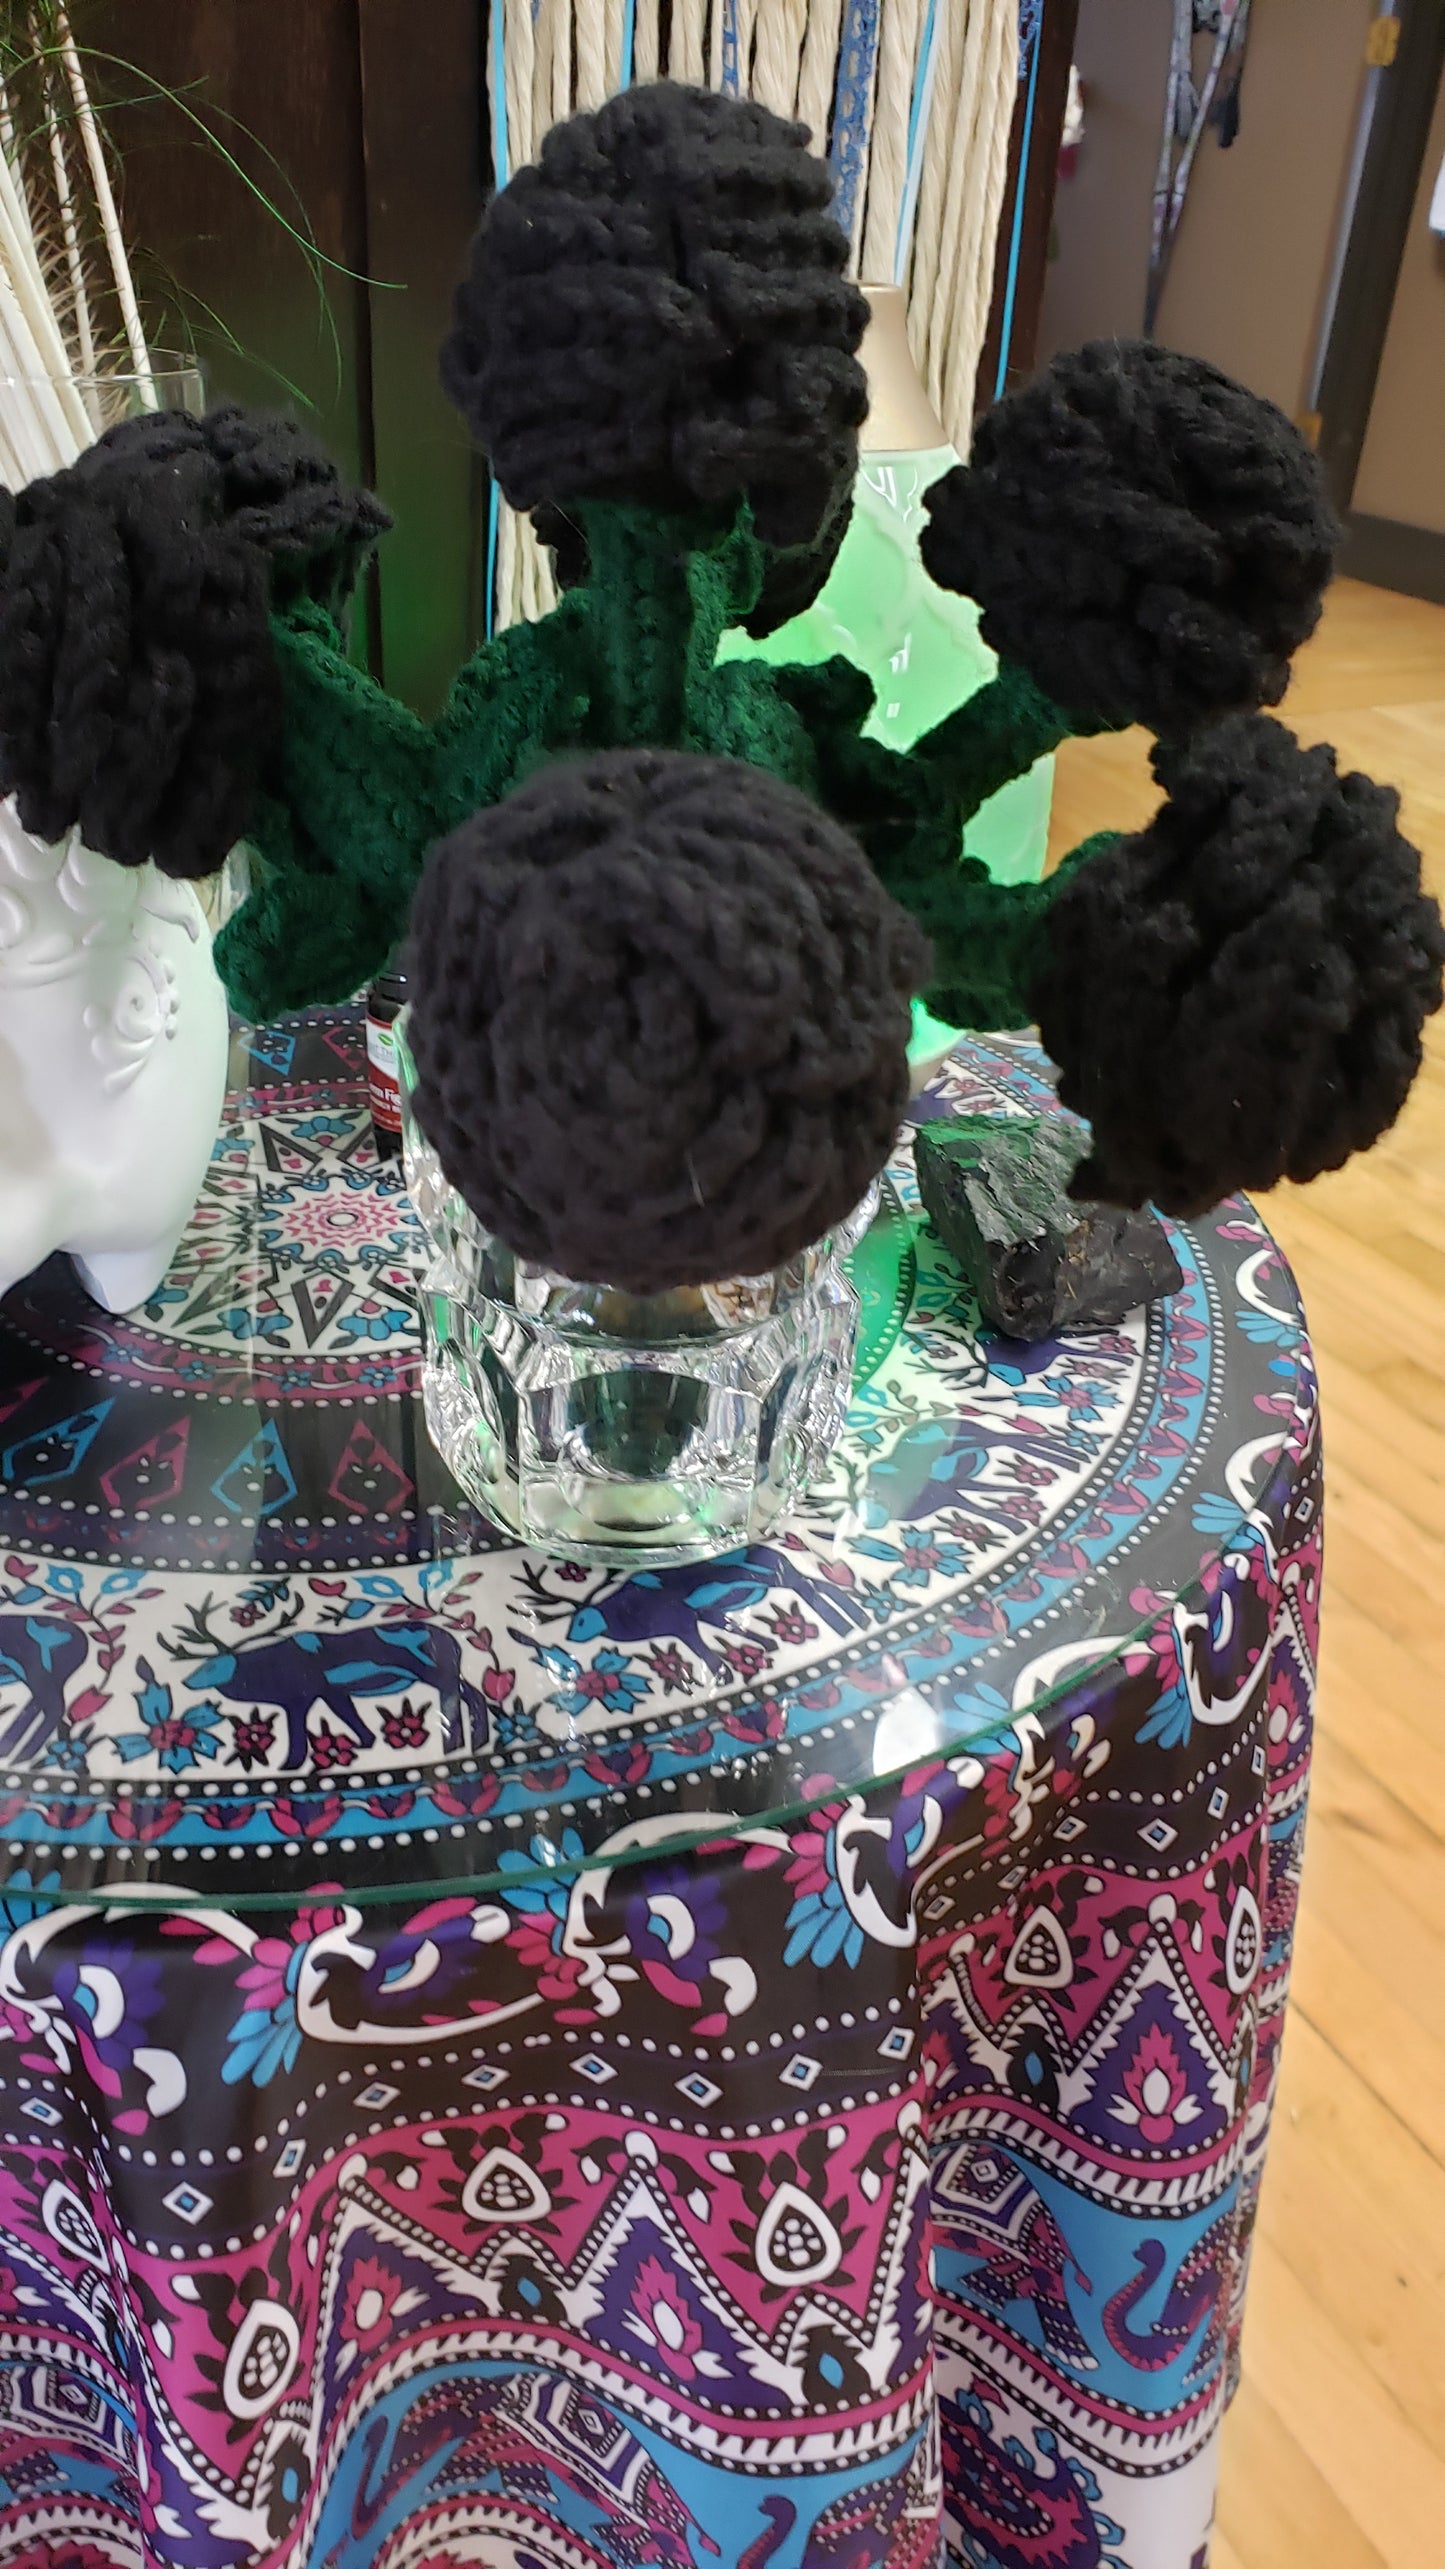 Hand Crafted Crochet Roses and Pen Roses - Made Locally - Tree Of Life Shoppe